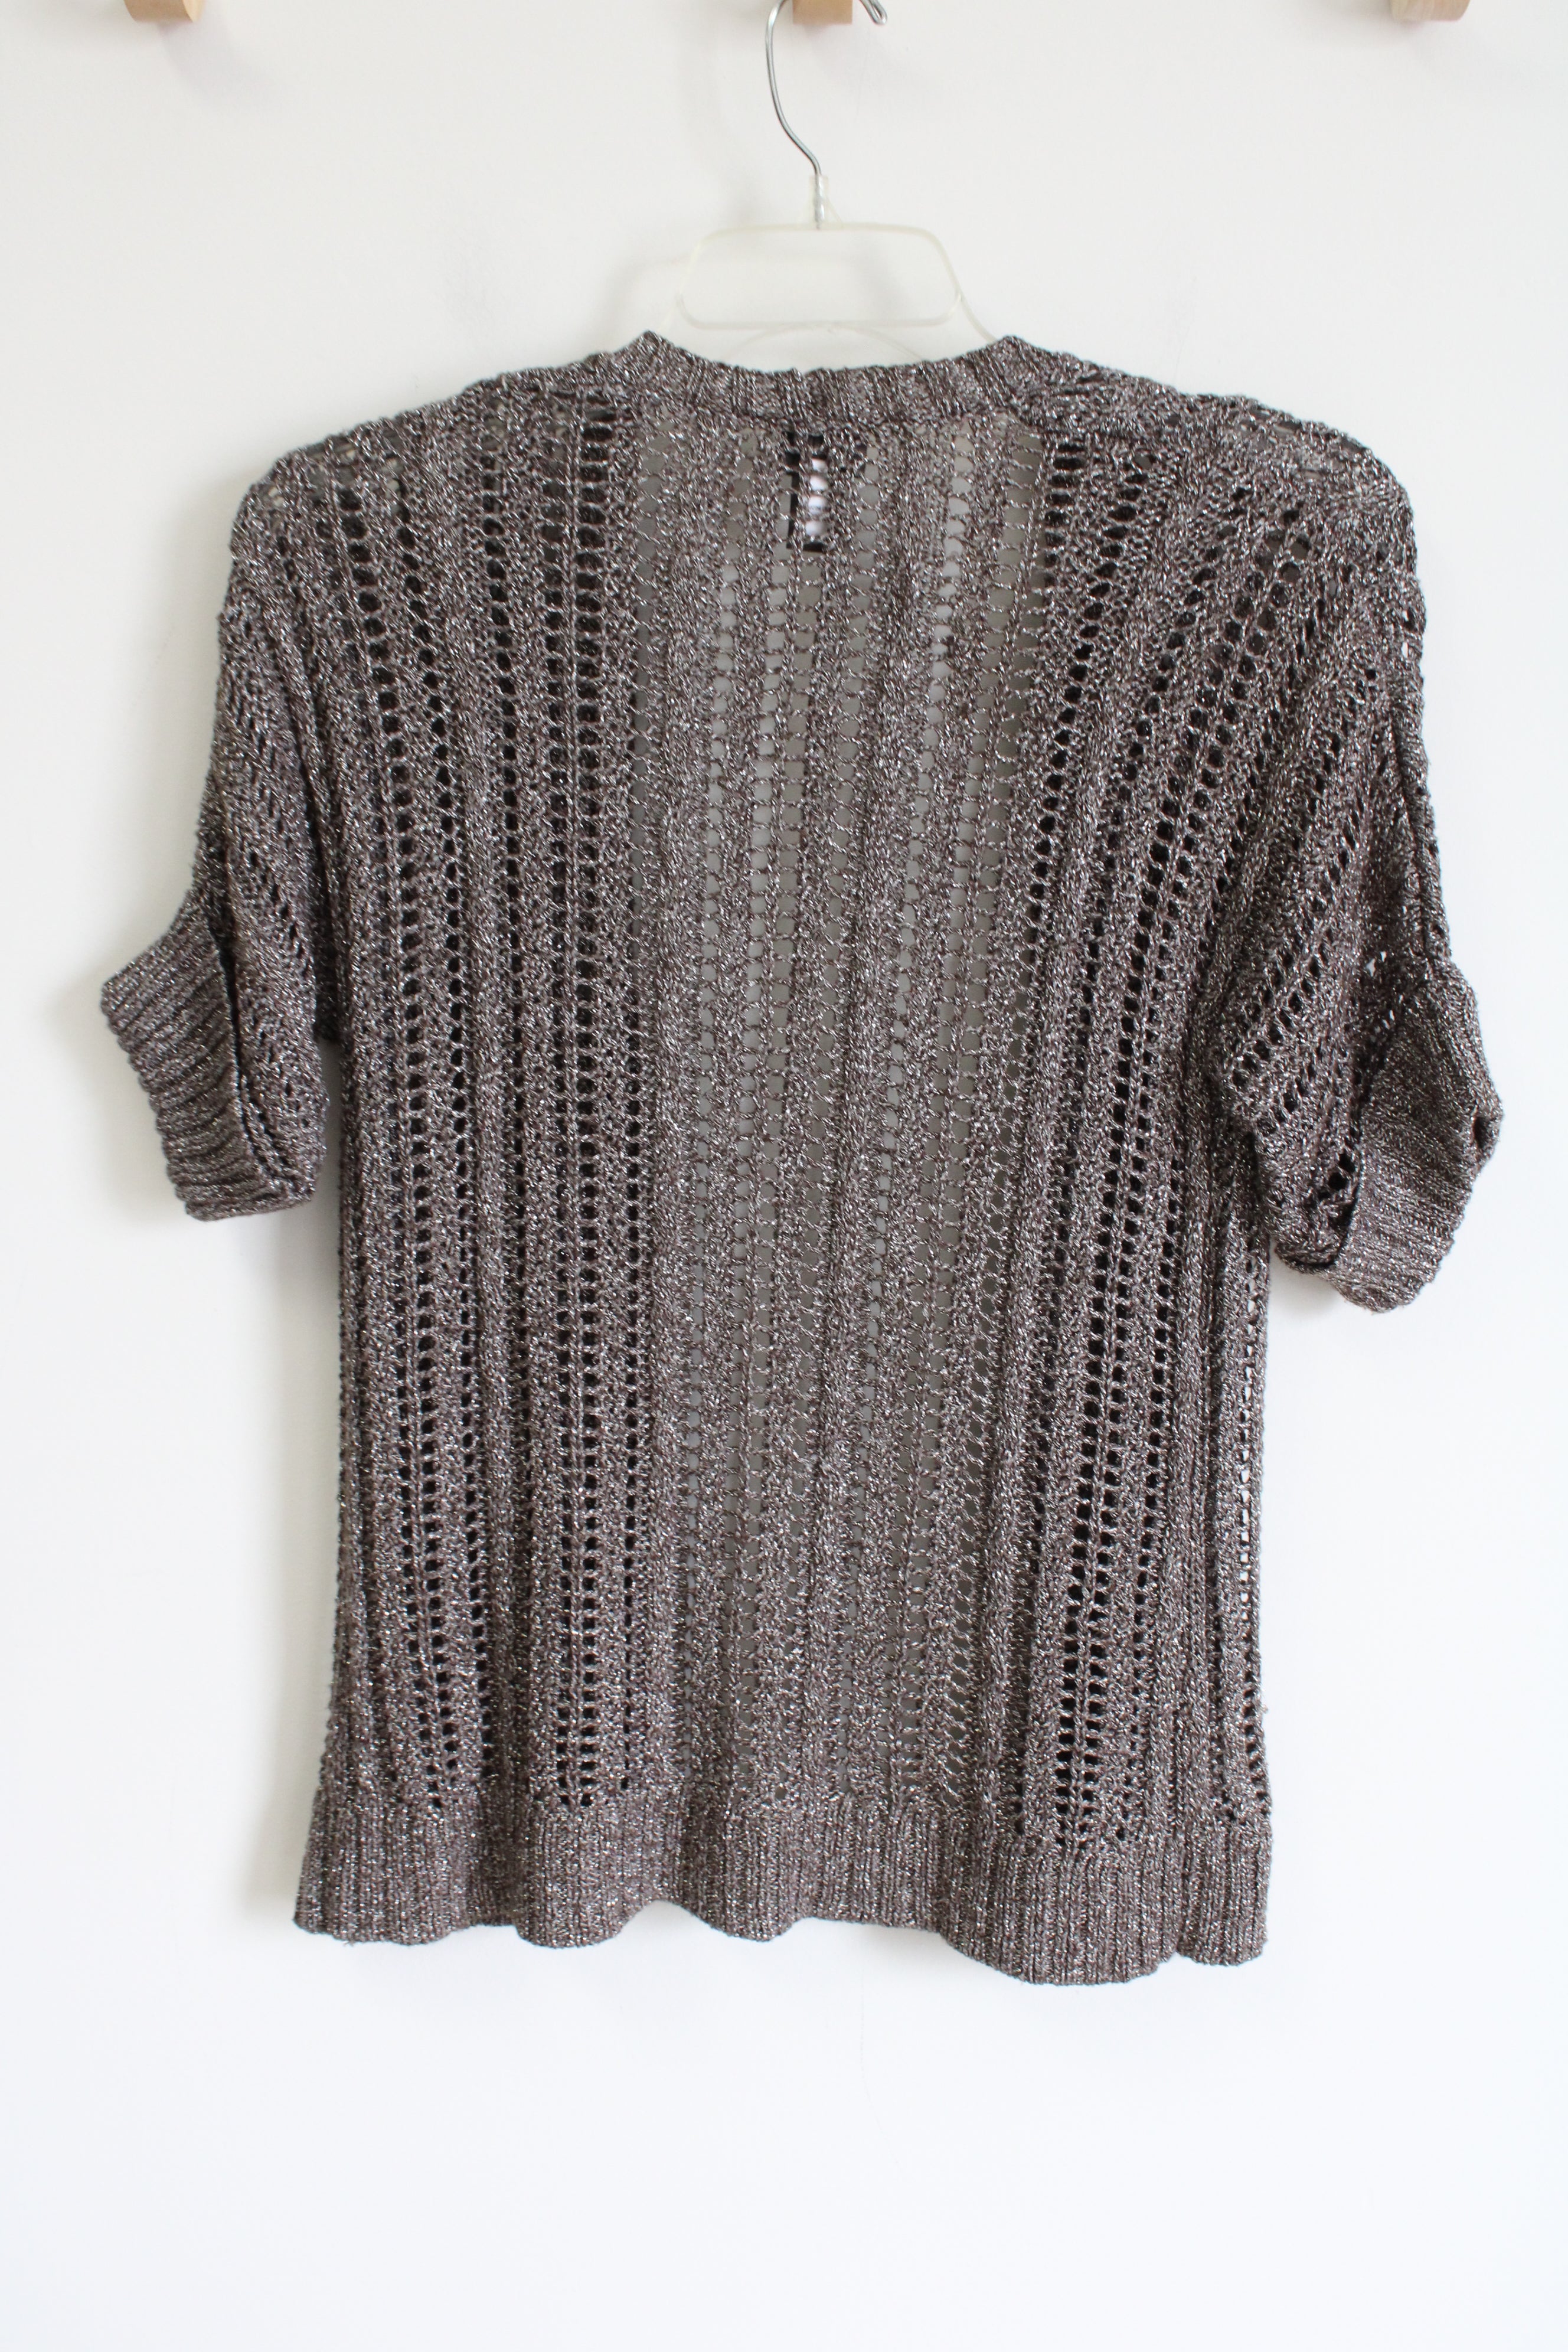 Additions By Chico's Gray silver Shimmer Knit Cardigan | 0 (S/4)